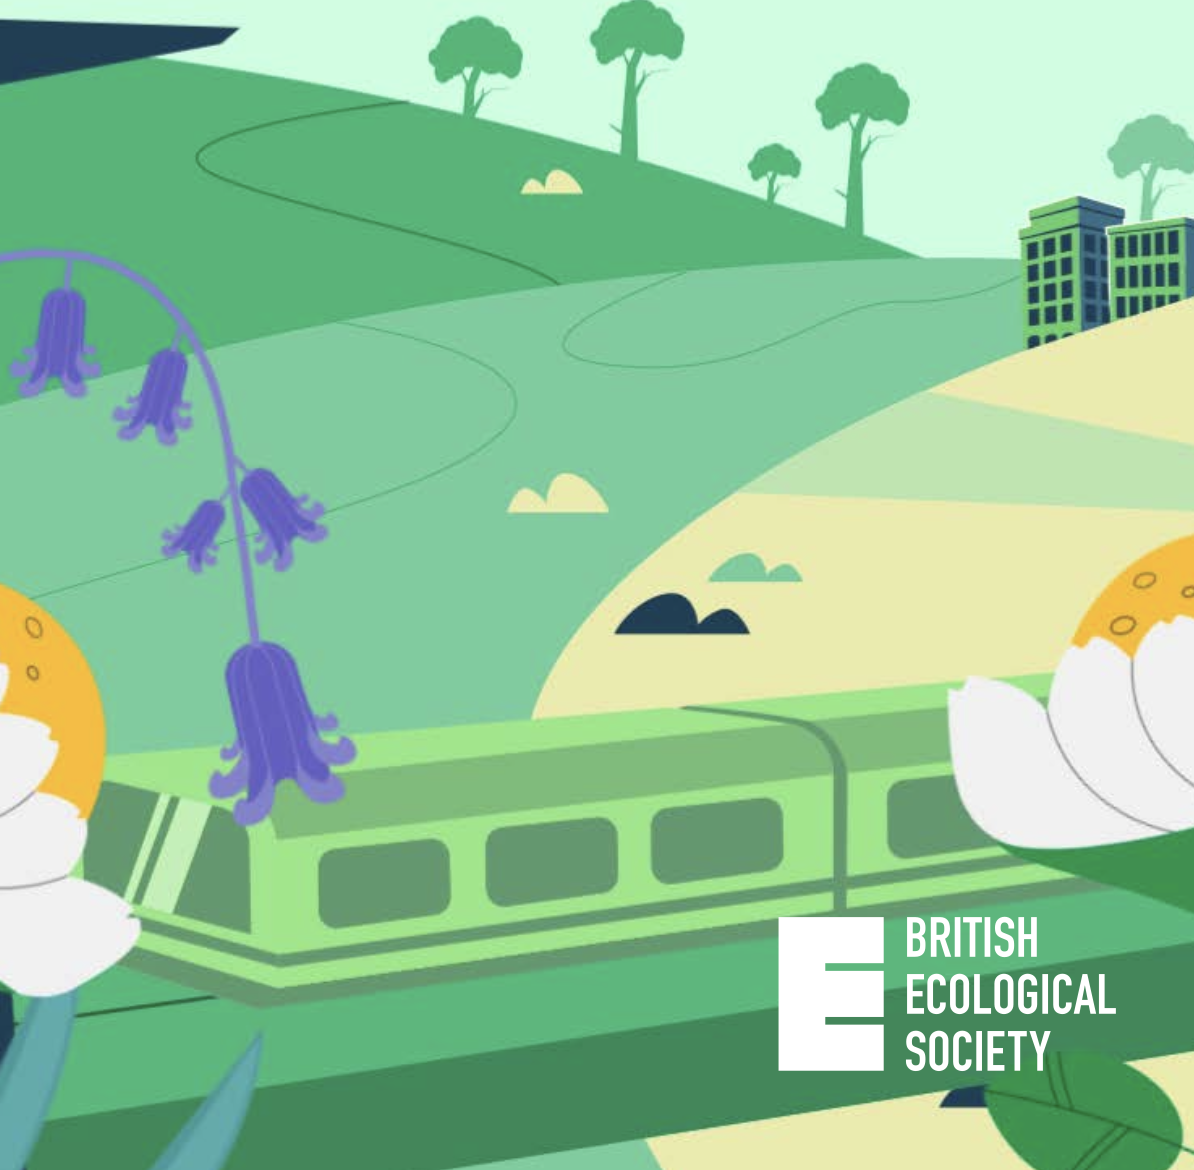 A cartoon image of a typical UK countryside scene. There is a railway line running across the bottom of the image, party obscured by daisies and bluebells. In the background there are a series of rolling hills with trees, footpaths and buildings. The logo for the British Ecological Society is placed in the bottom right-hand corner of the image.